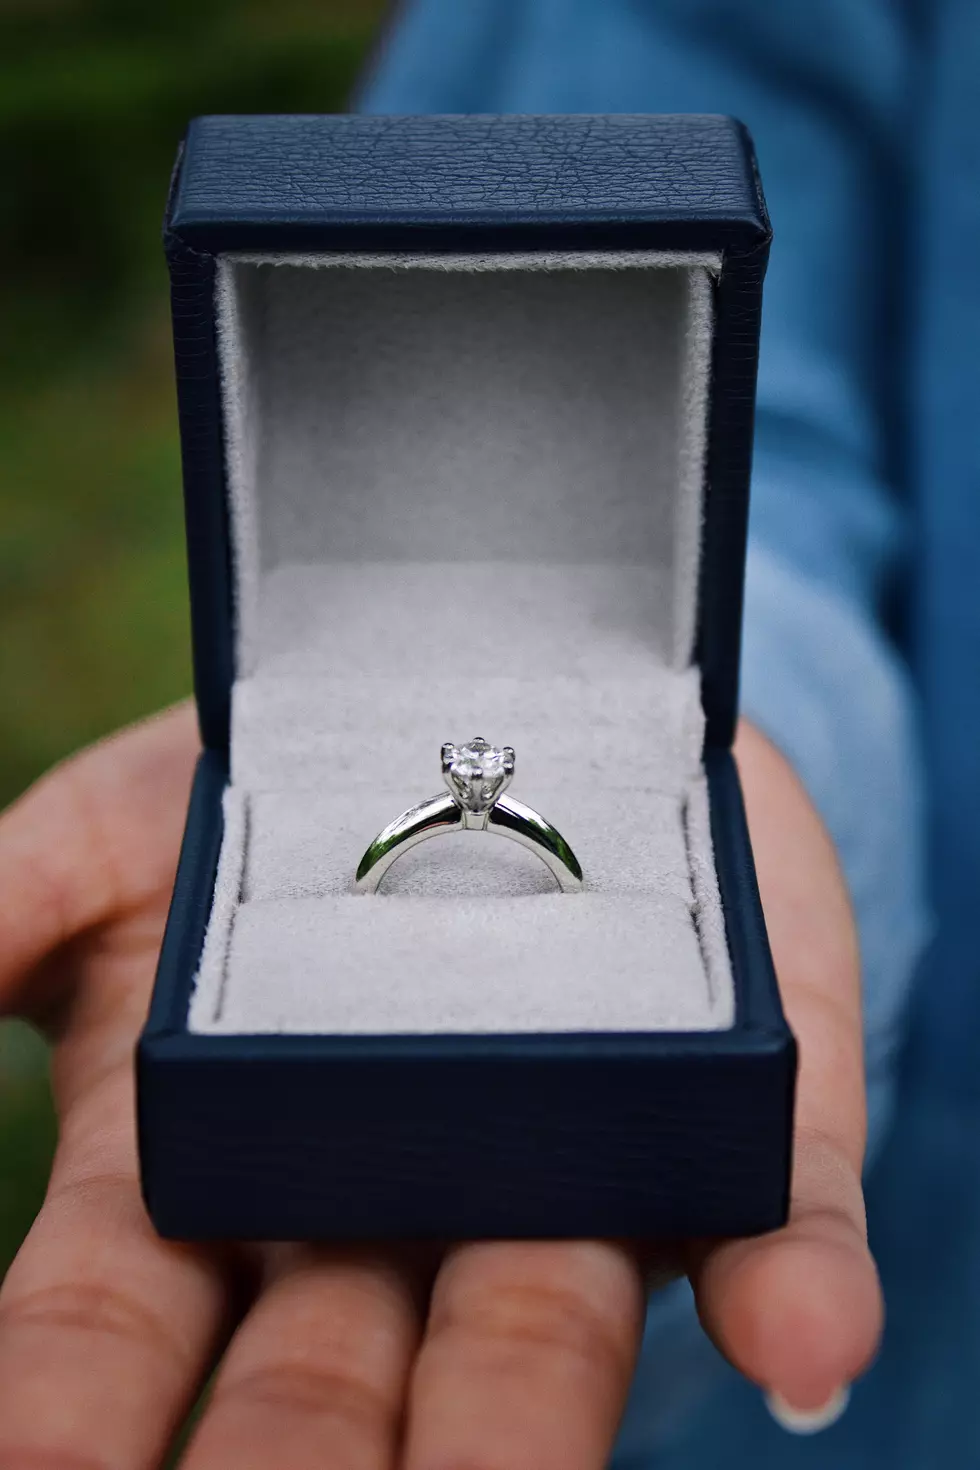 Engagement Ring Found After Being Lost in Presumpscot River